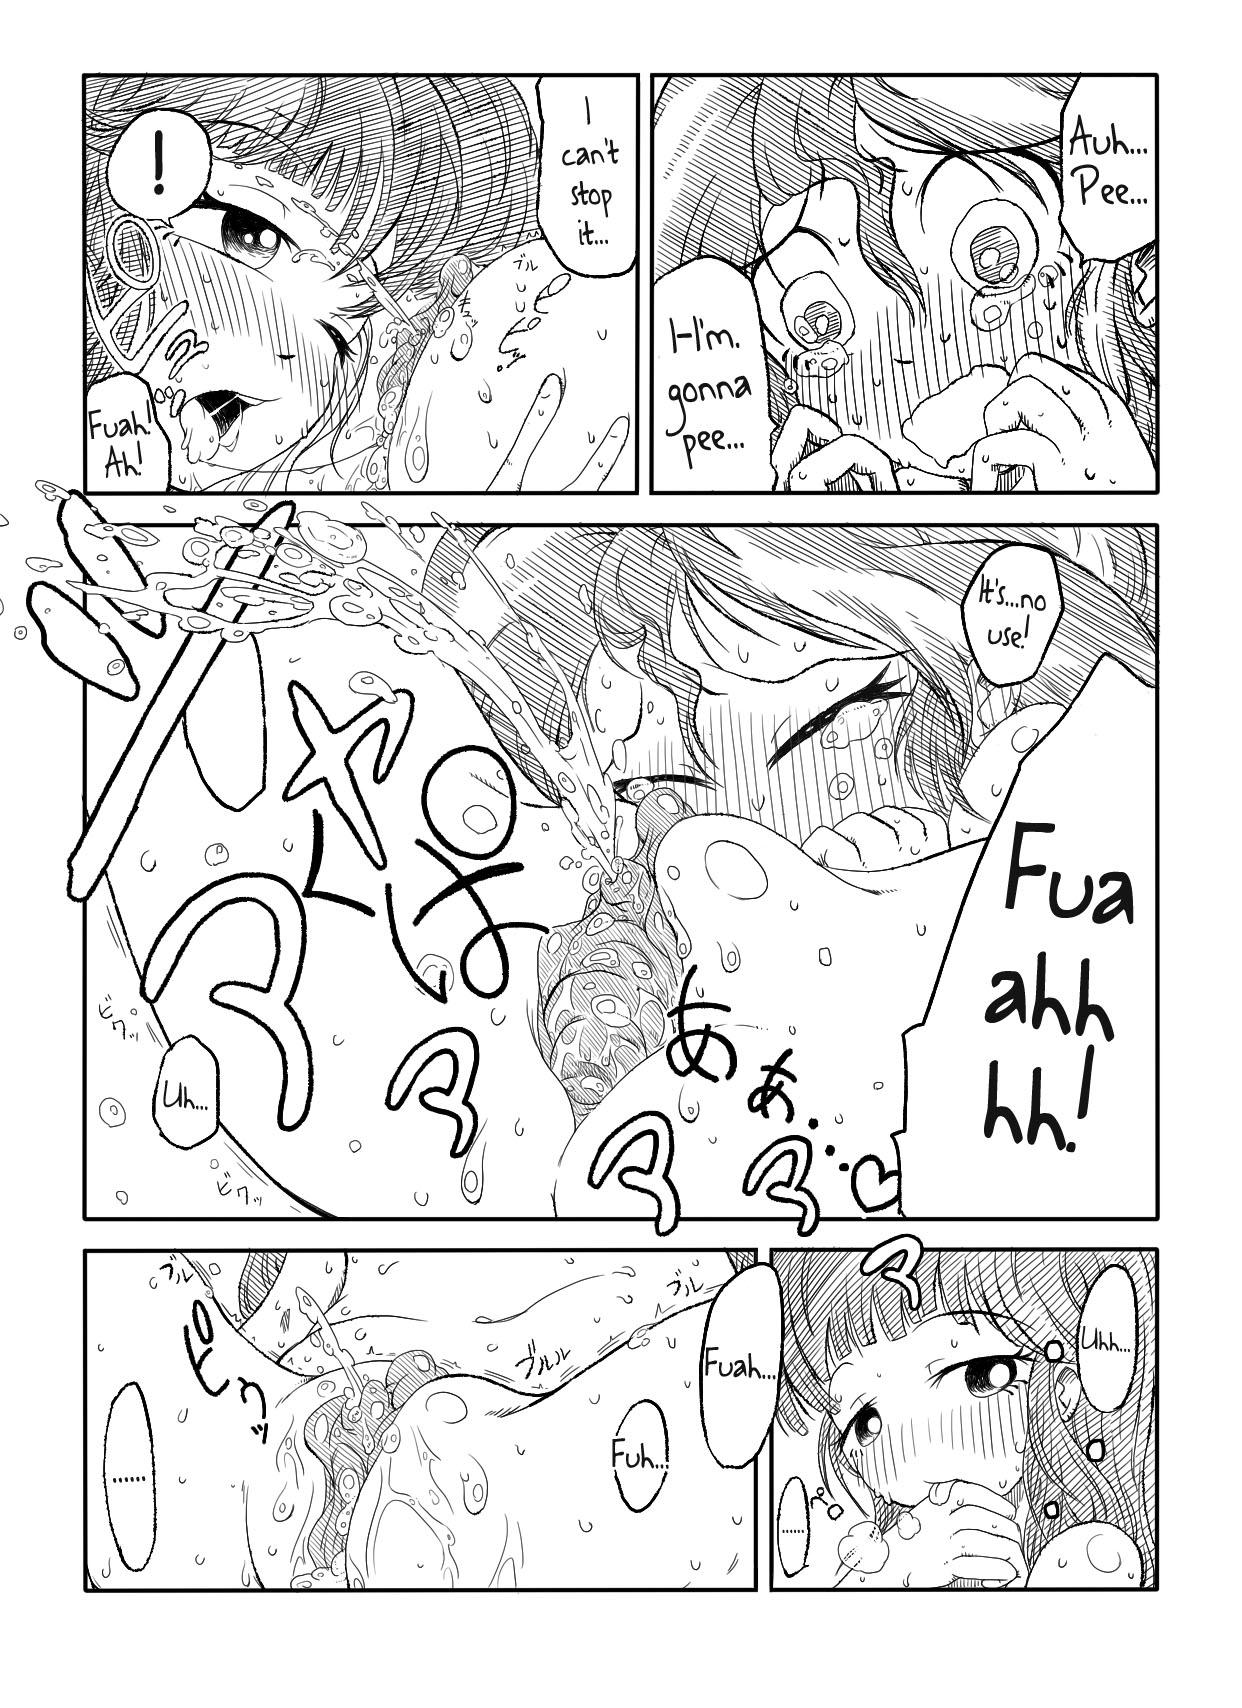 Twi to Shimmer no Ero Manga | The Manga In Which Sunset Shimmer Takes A Piss 11